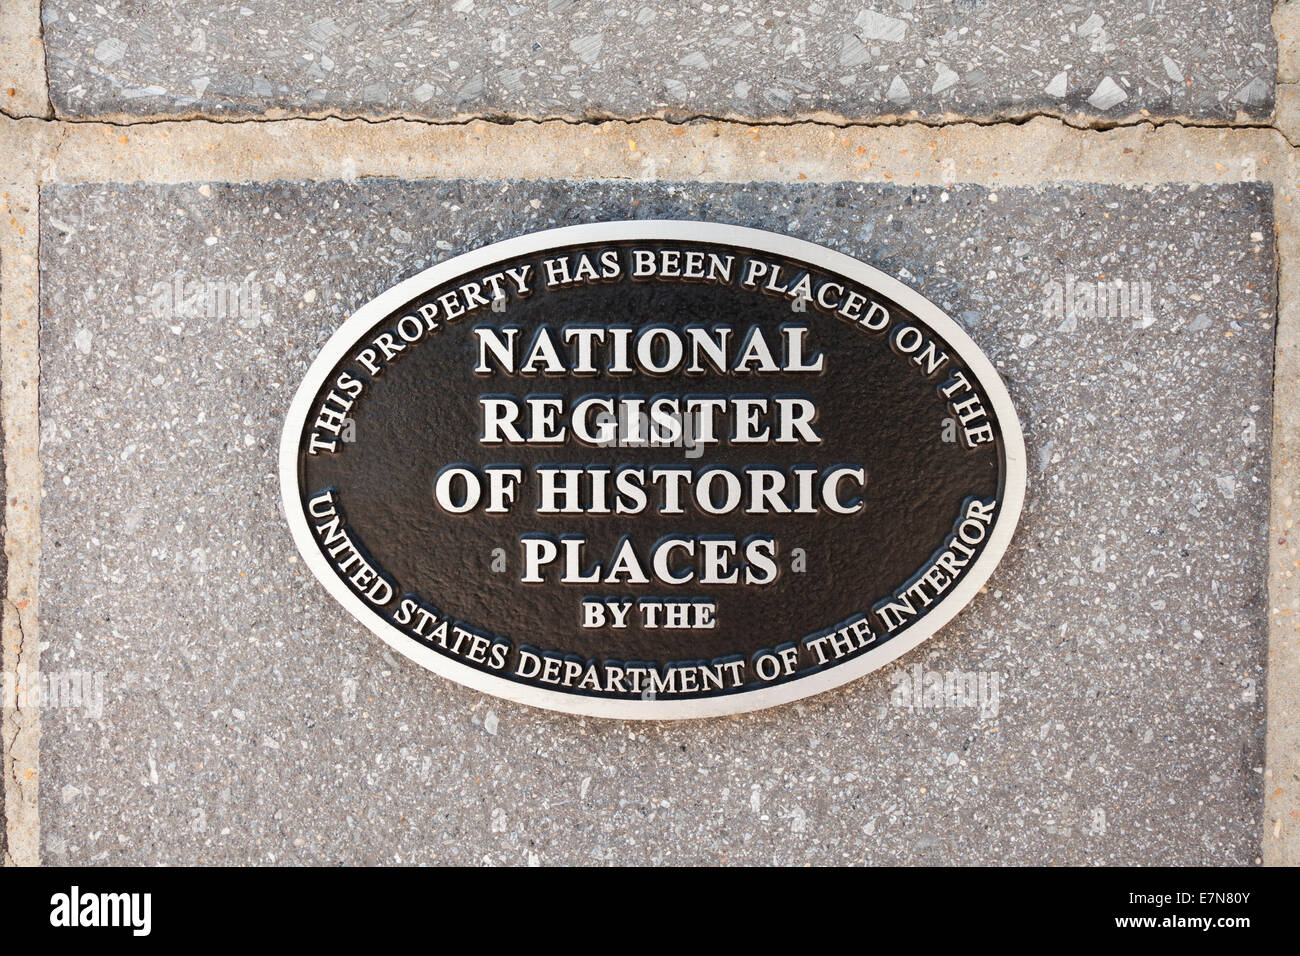 National Register of Historic Places plaque - USA Stock Photo